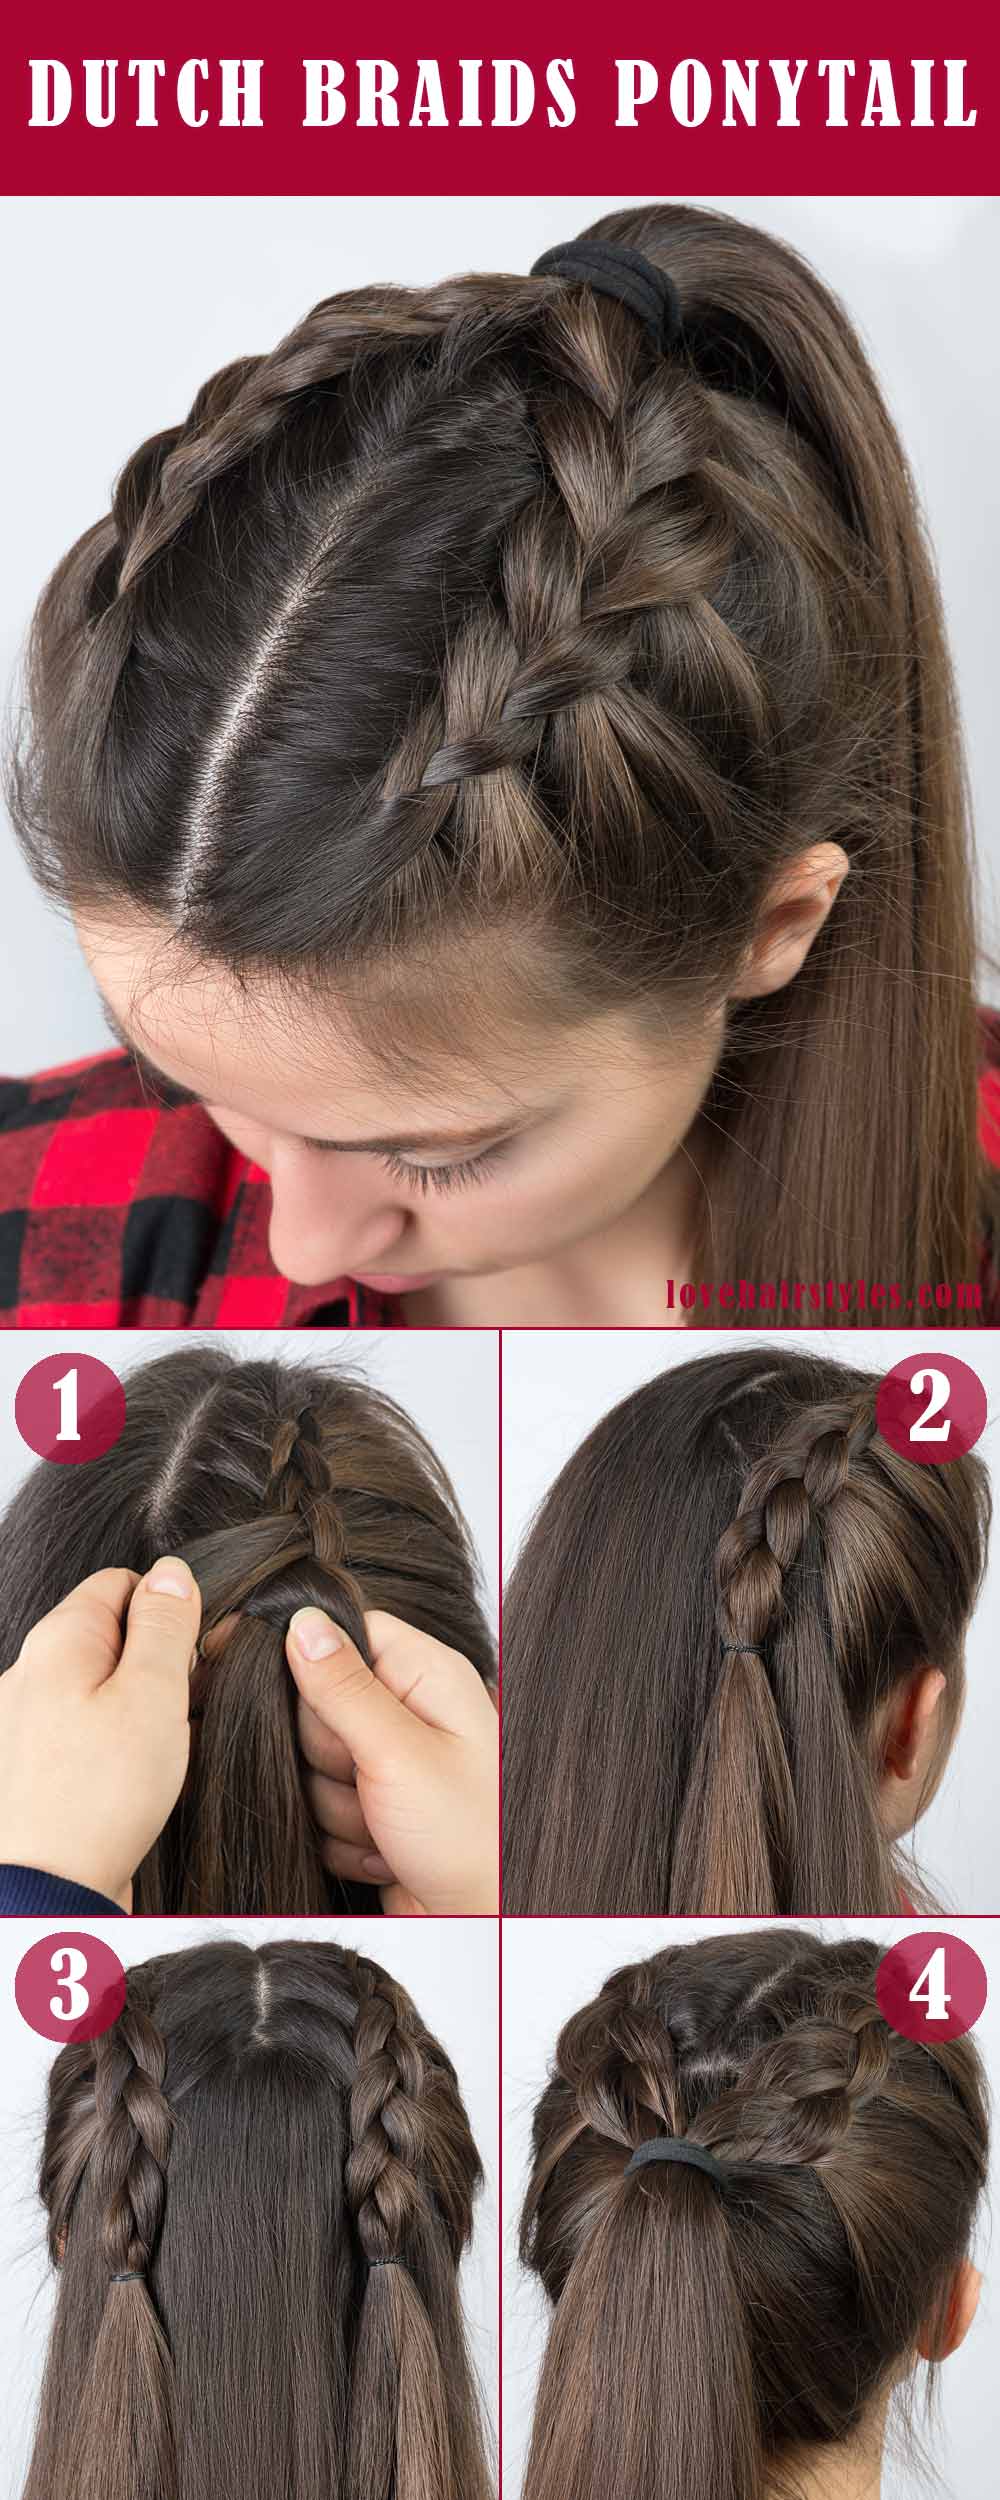 25 Easy Hairstyles for Medium-Length Hair to Do in Minutes | Who What Wear